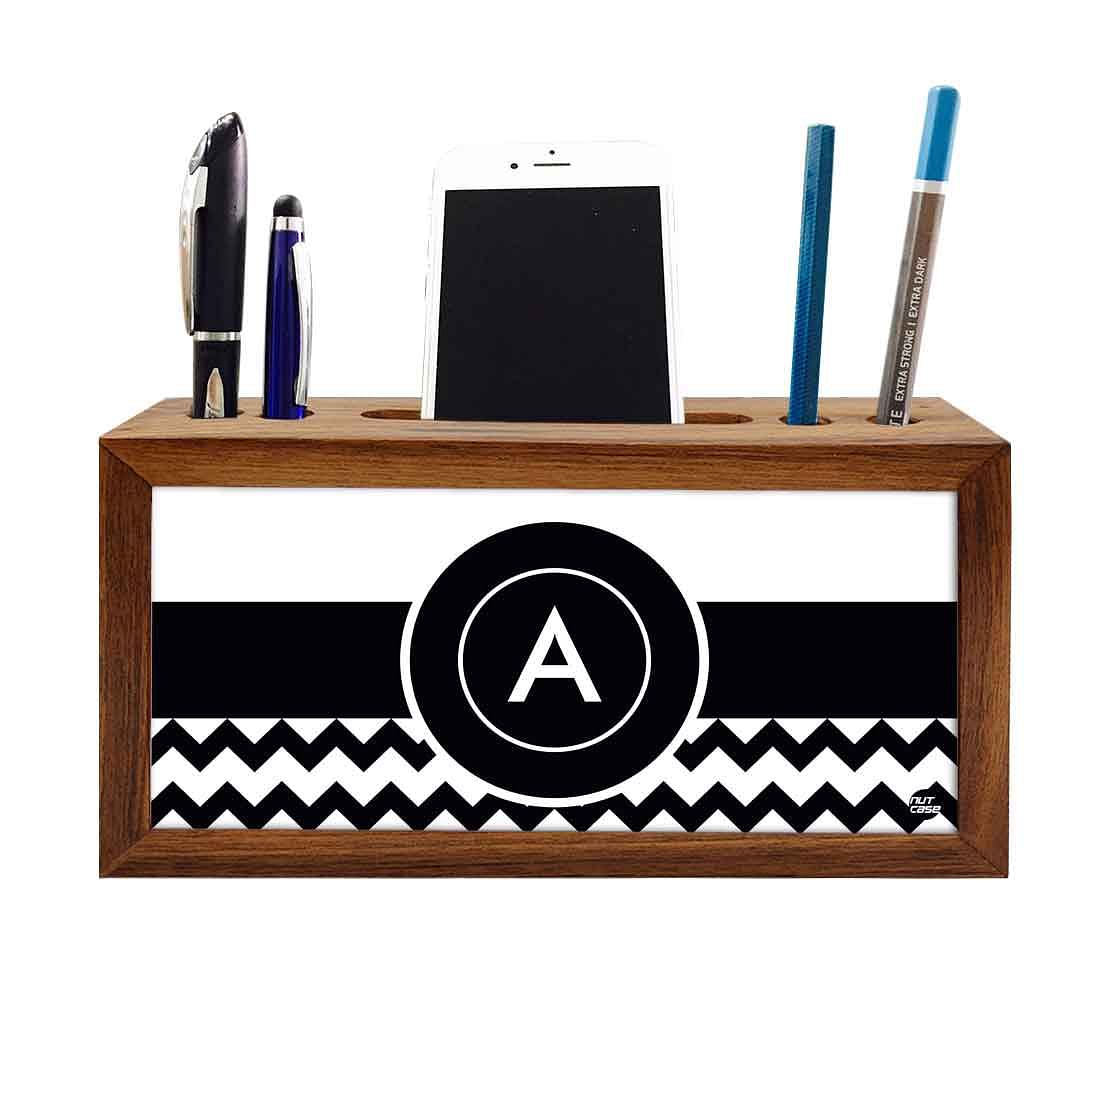 Custom-Made Wooden Pen Stand for Office - Black and White Pattern Nutcase